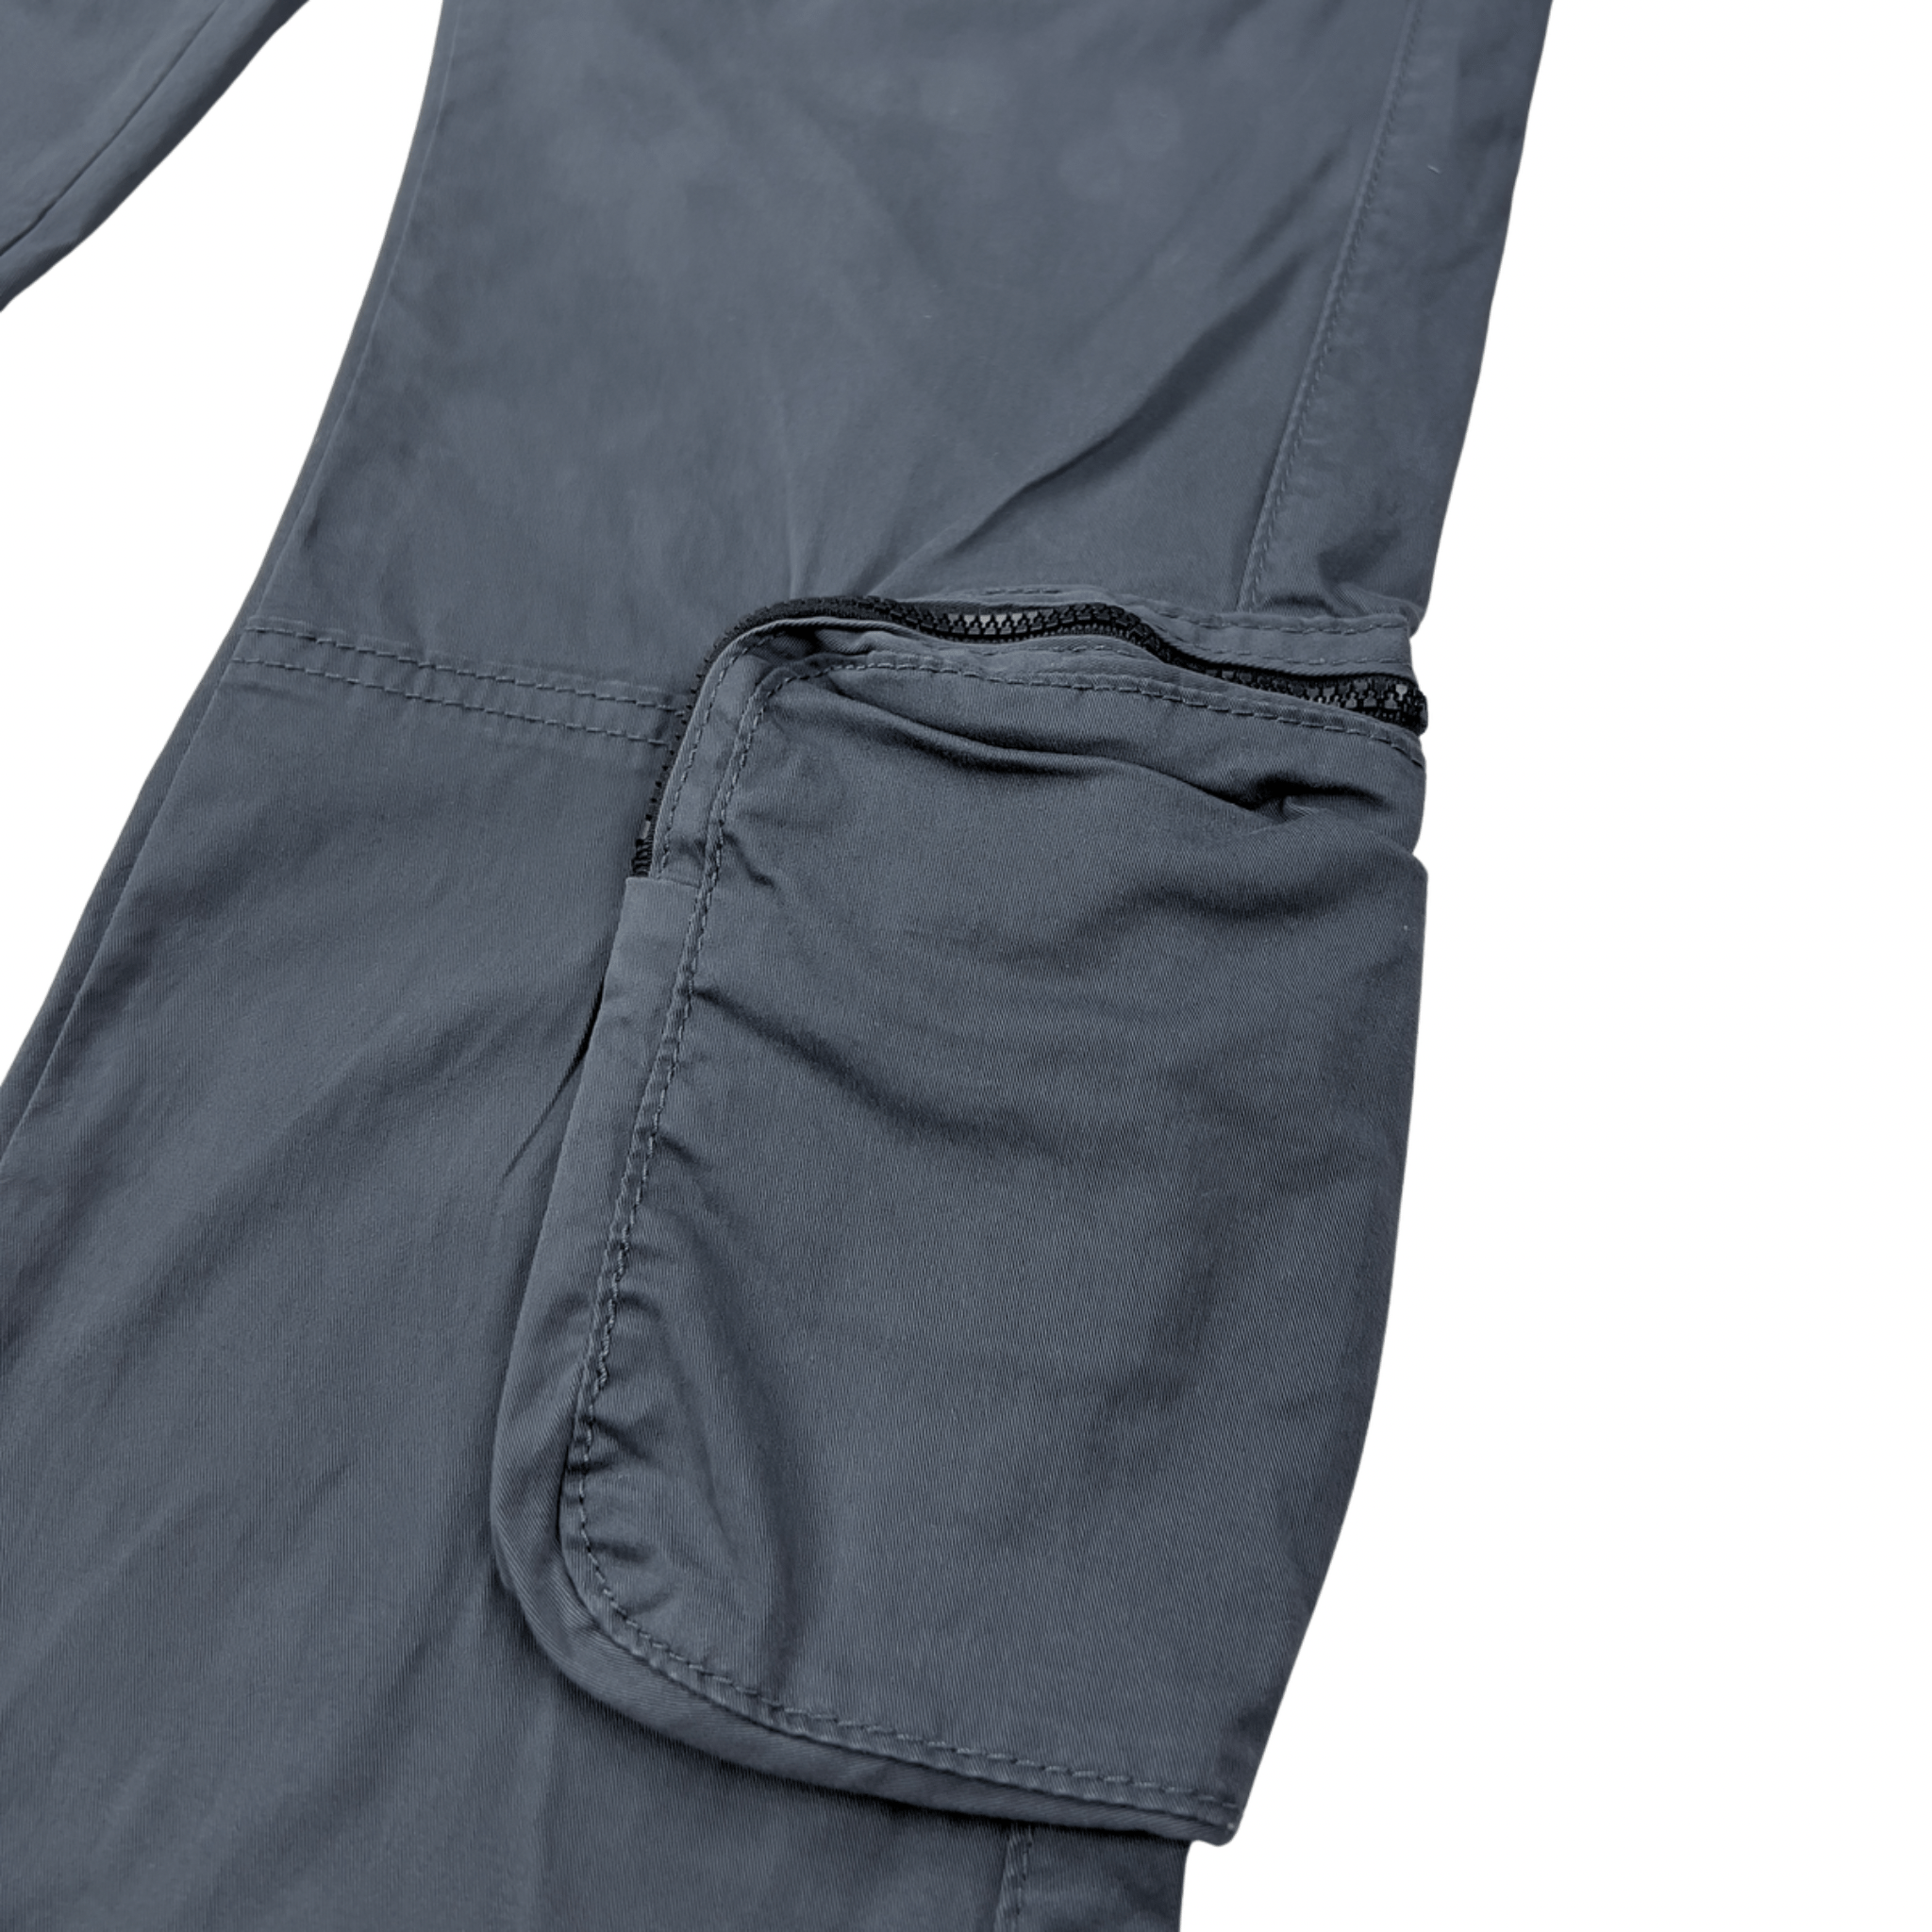 Utility Pants in charcoal - Kuwalla Tee - State Of Flux